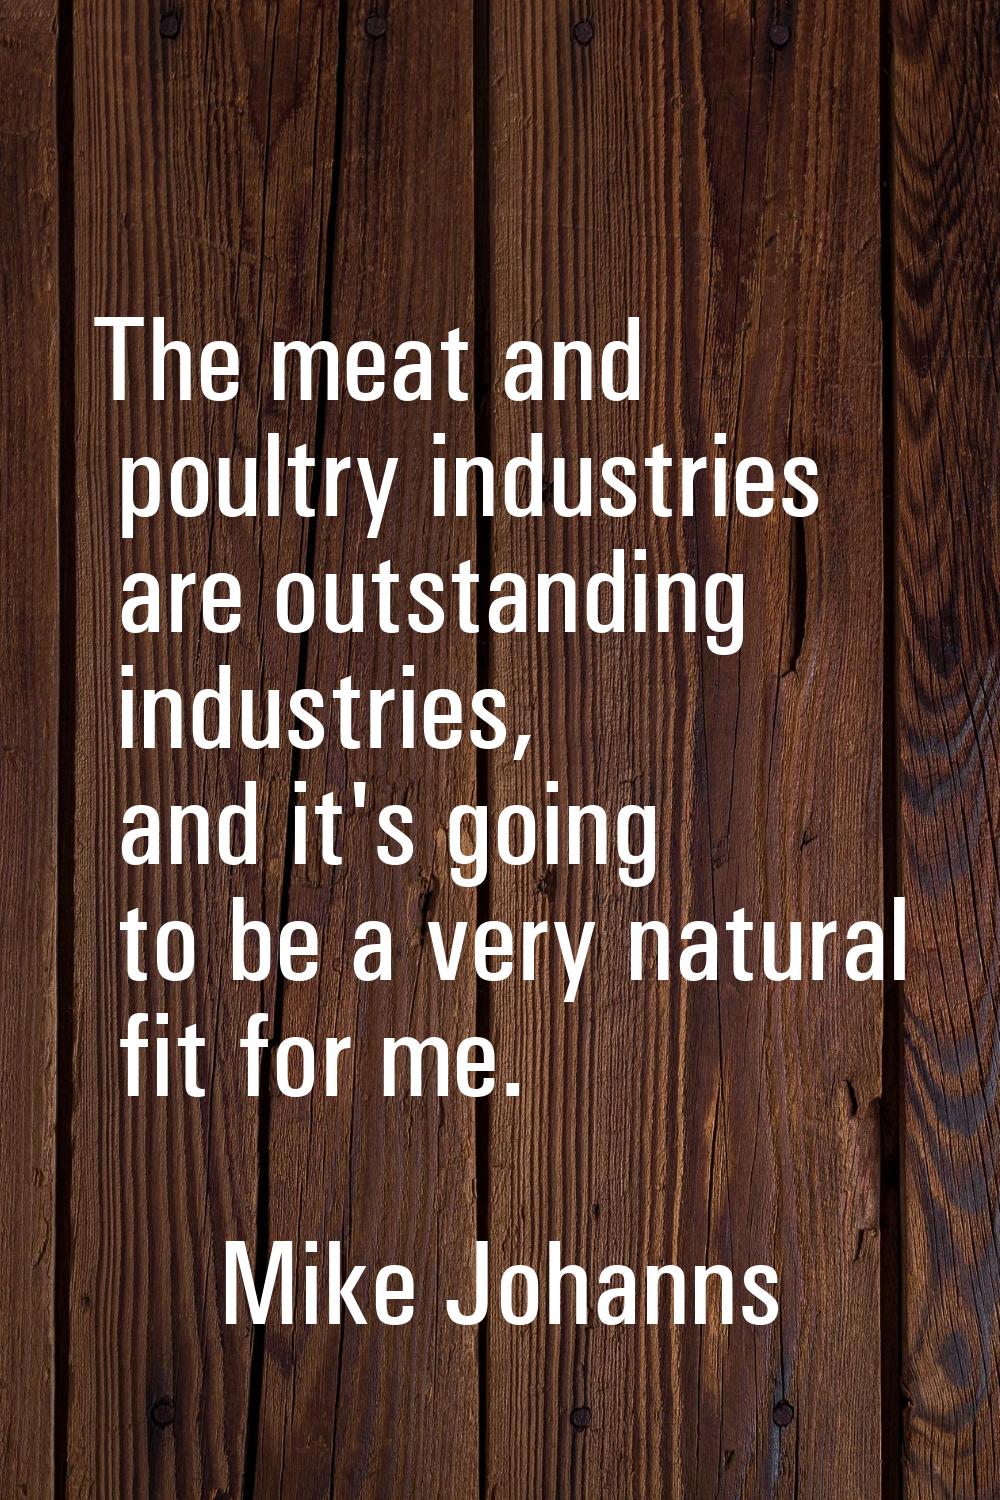 The meat and poultry industries are outstanding industries, and it's going to be a very natural fit